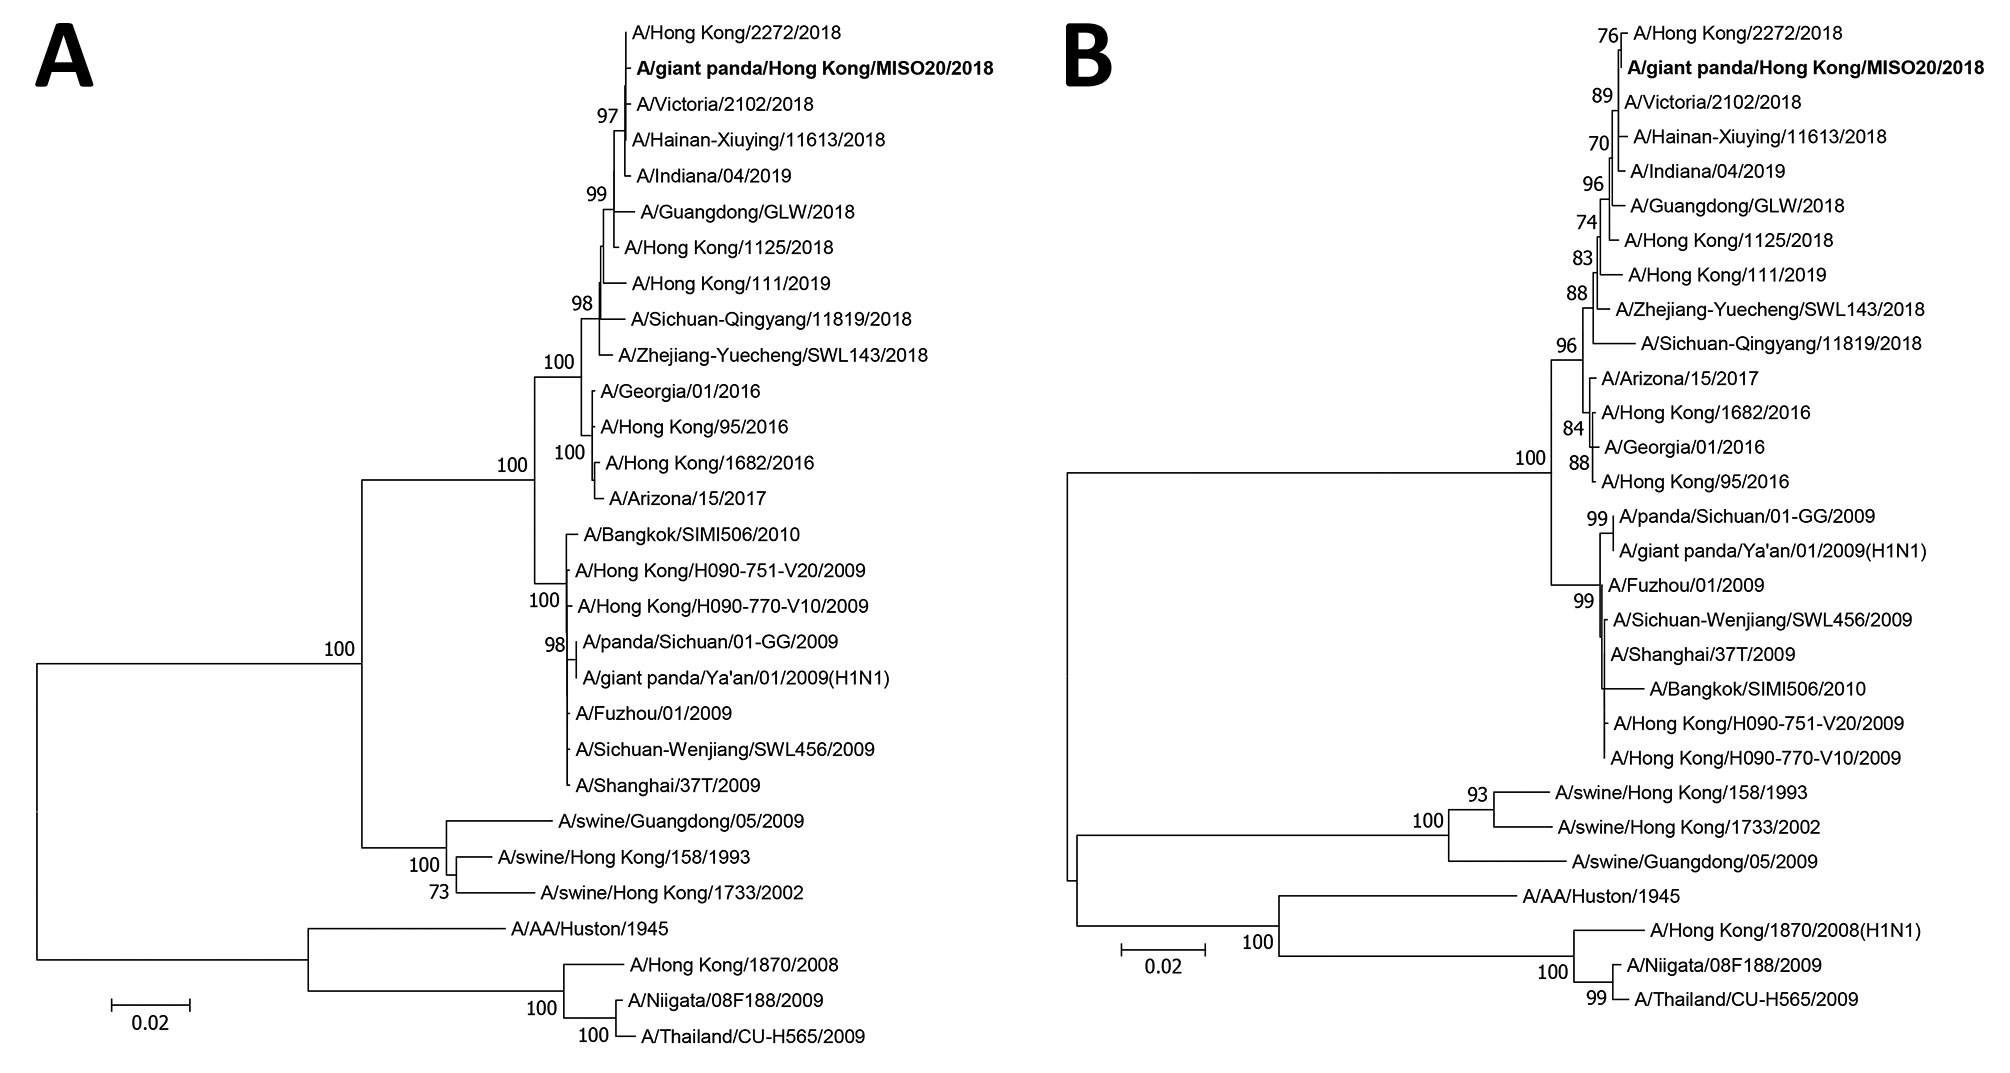 Phylogenetic analyses of (A) hemagglutinin and (B) neuraminidase gene sequences of influenza A(H1N1)pdm09 (A/giant panda/Hong Kong/MISO20/2018) isolated from a giant panda in Hong Kong, China (bold), and other previously characterized strains retrieved from GISAID. The trees were constructed by the neighbor-joining method using Kimura 2-parameter in MEGA6 (http://www.megasoftware.net). A total of 1,691 nt positions in hemagglutinin and 1,404 in neuraminidase genes were included in the analyses. 